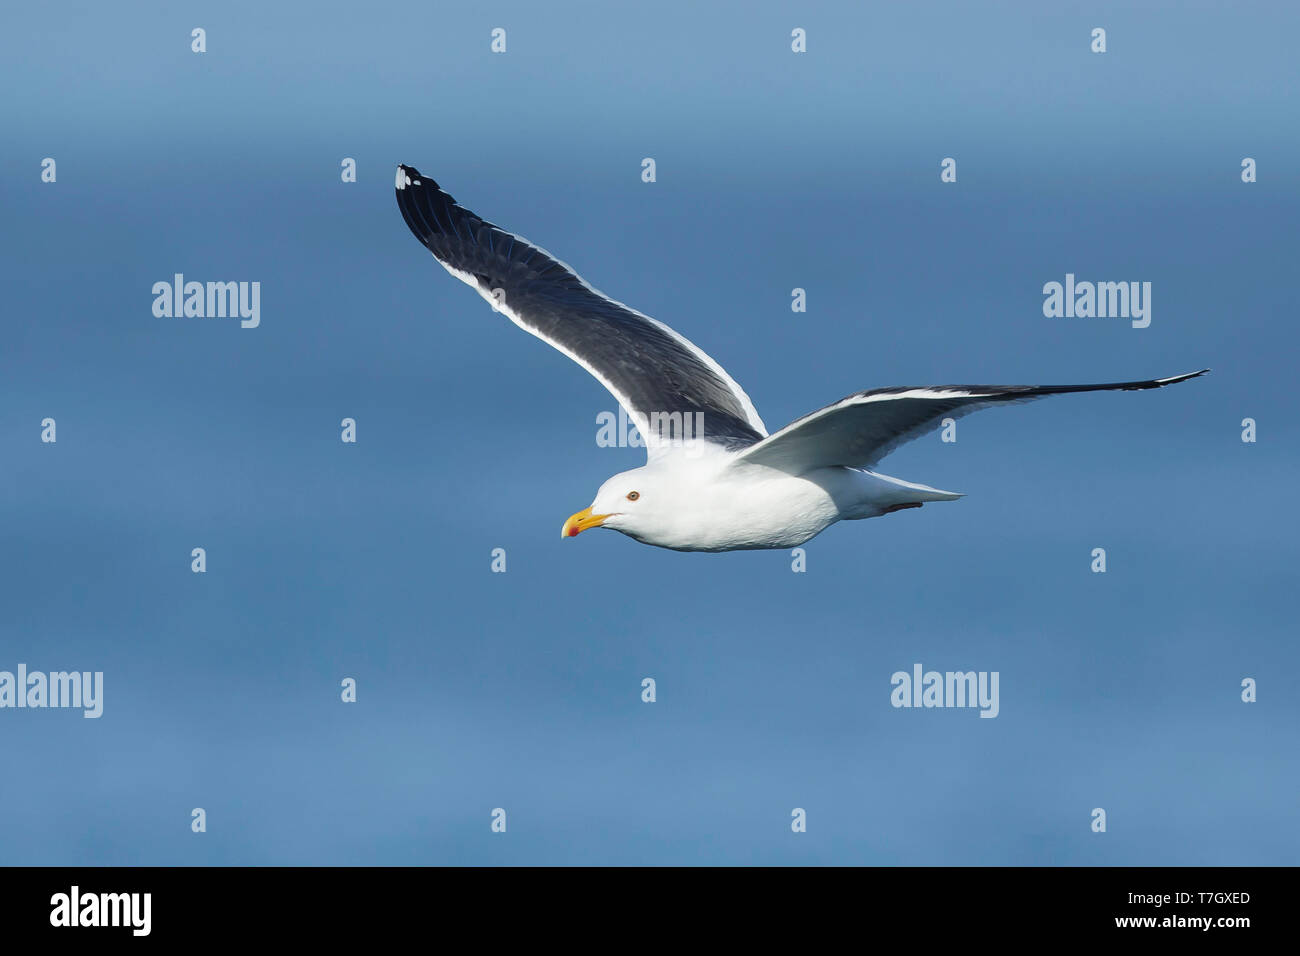 Adult Western Gull (Larus occidentalis) in flight with pacific ocean as a background in San Diego County, California. Stock Photo